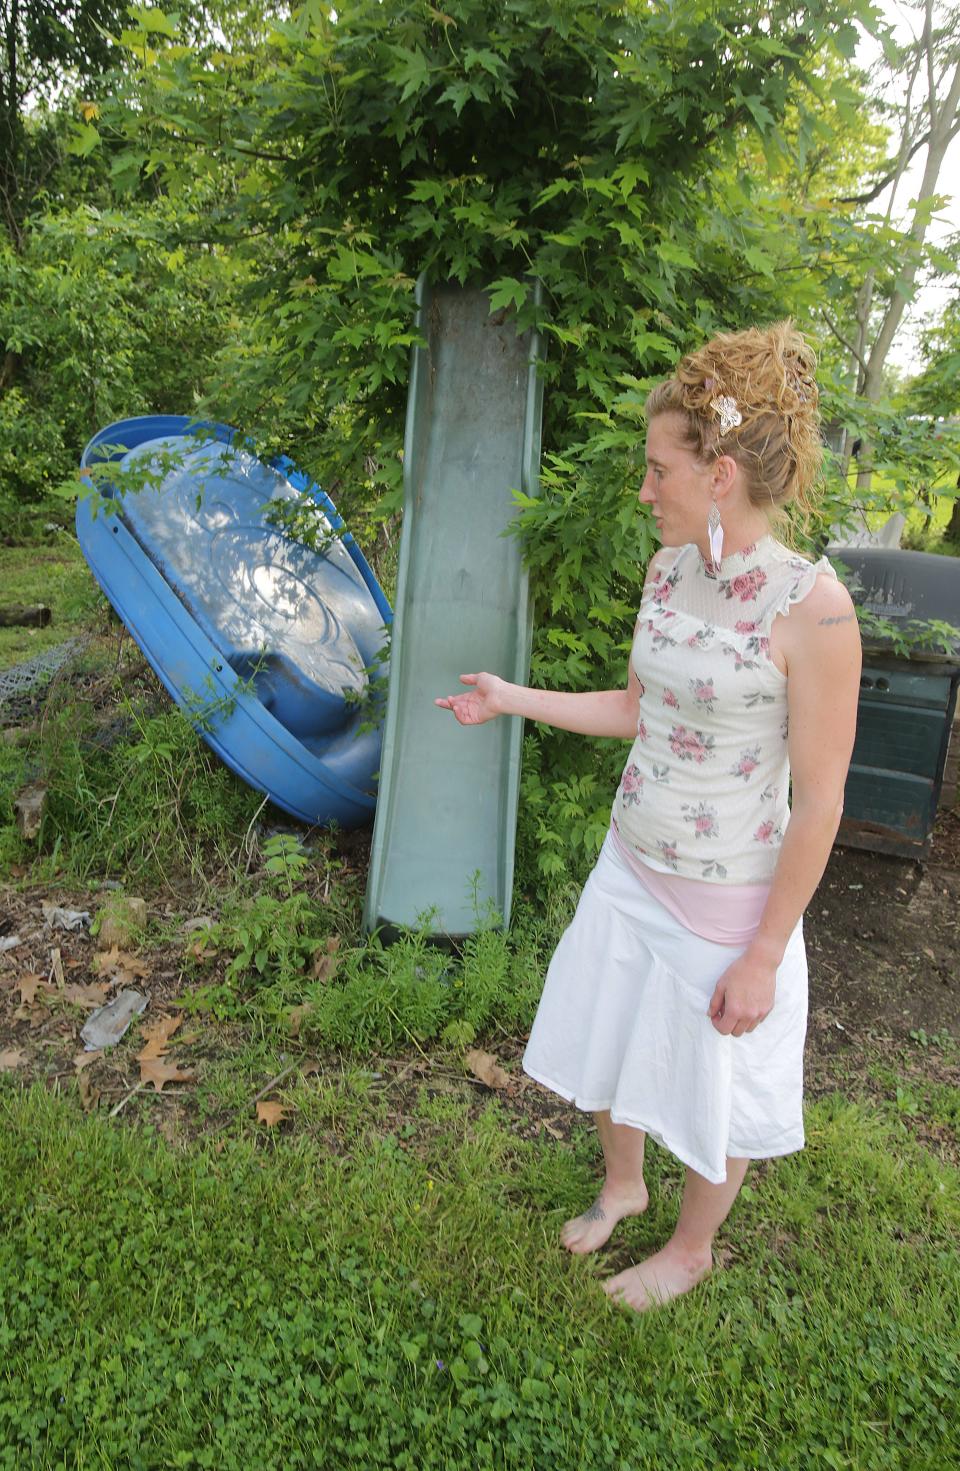 Amanda Martin shows some of the junk left on property next to her southwest Massillon home. The junk will be cleaned up by IMPACT Massillon in June.